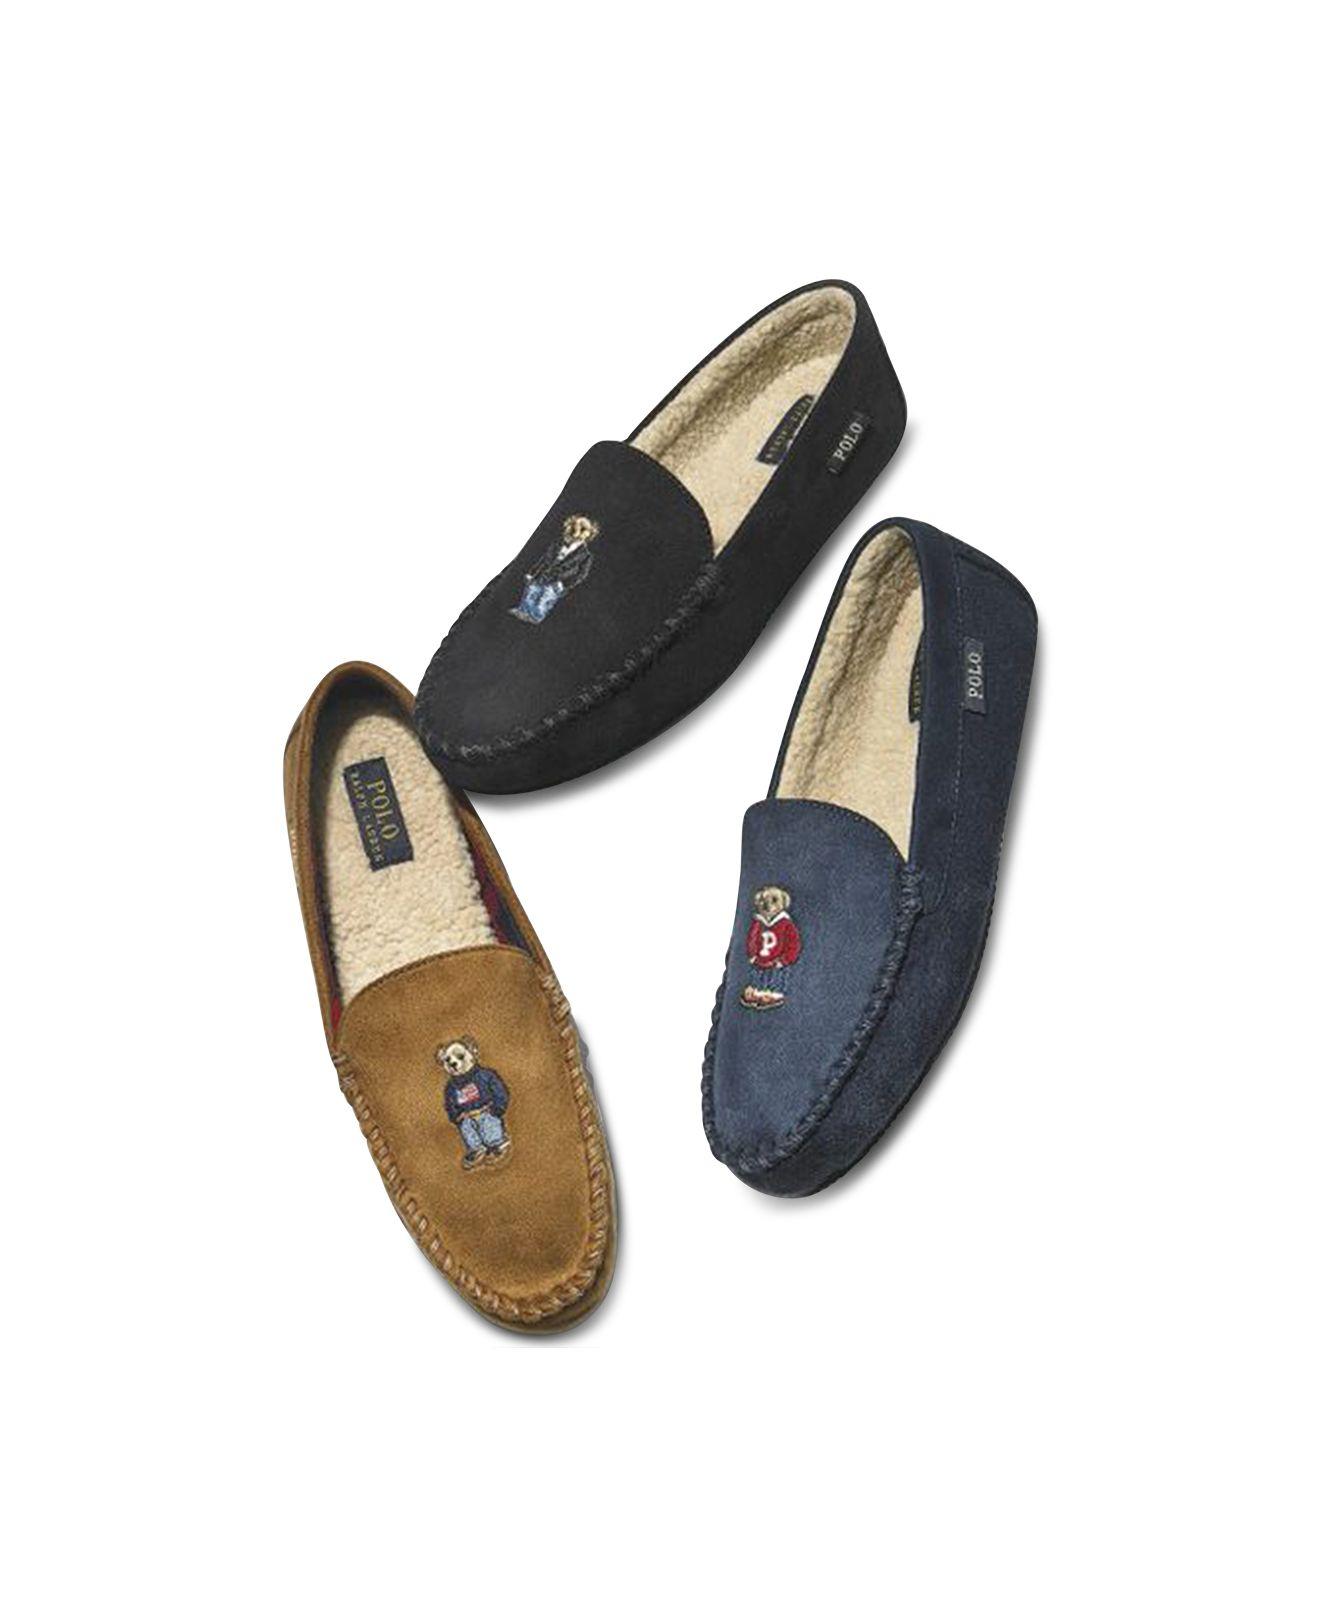 Polo Ralph Lauren Bear Slippers Outlet, SAVE 45% 